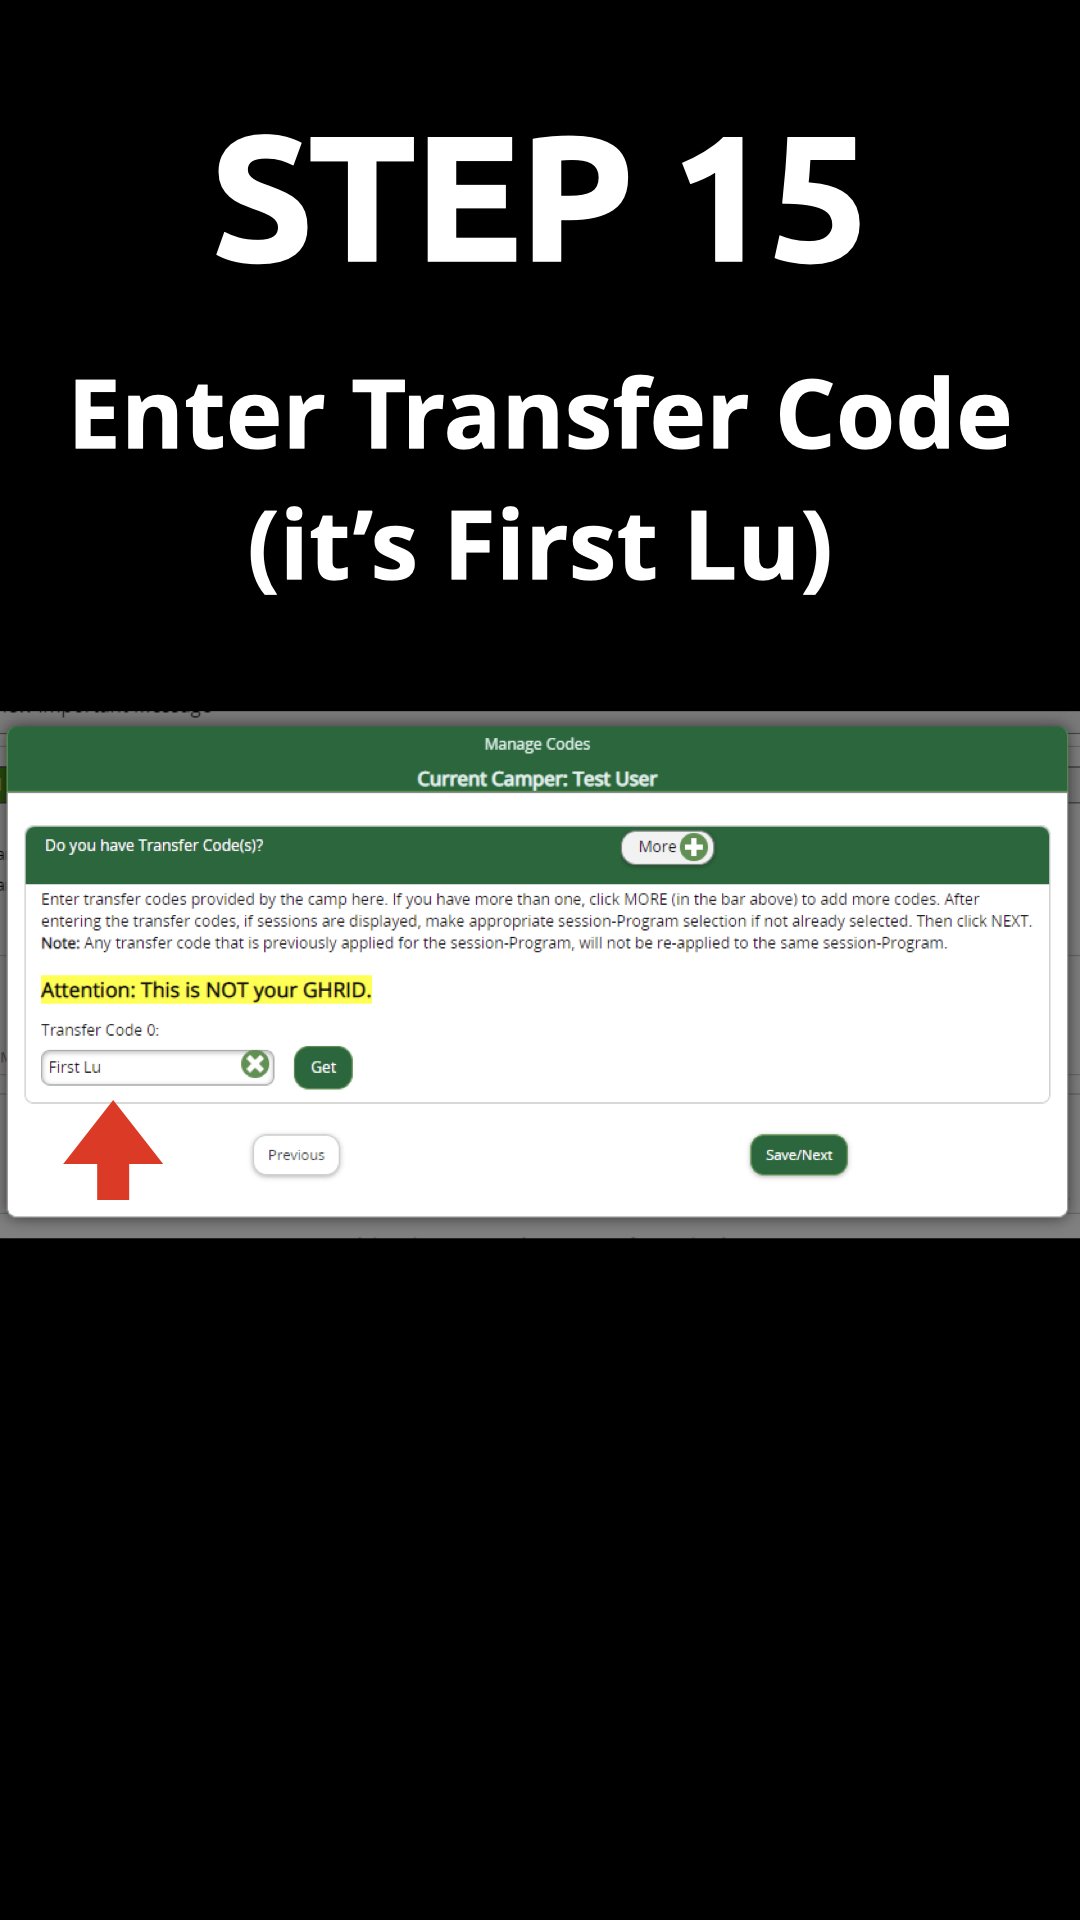  Enter your Transfer Code:  First Lu   Click  Get  